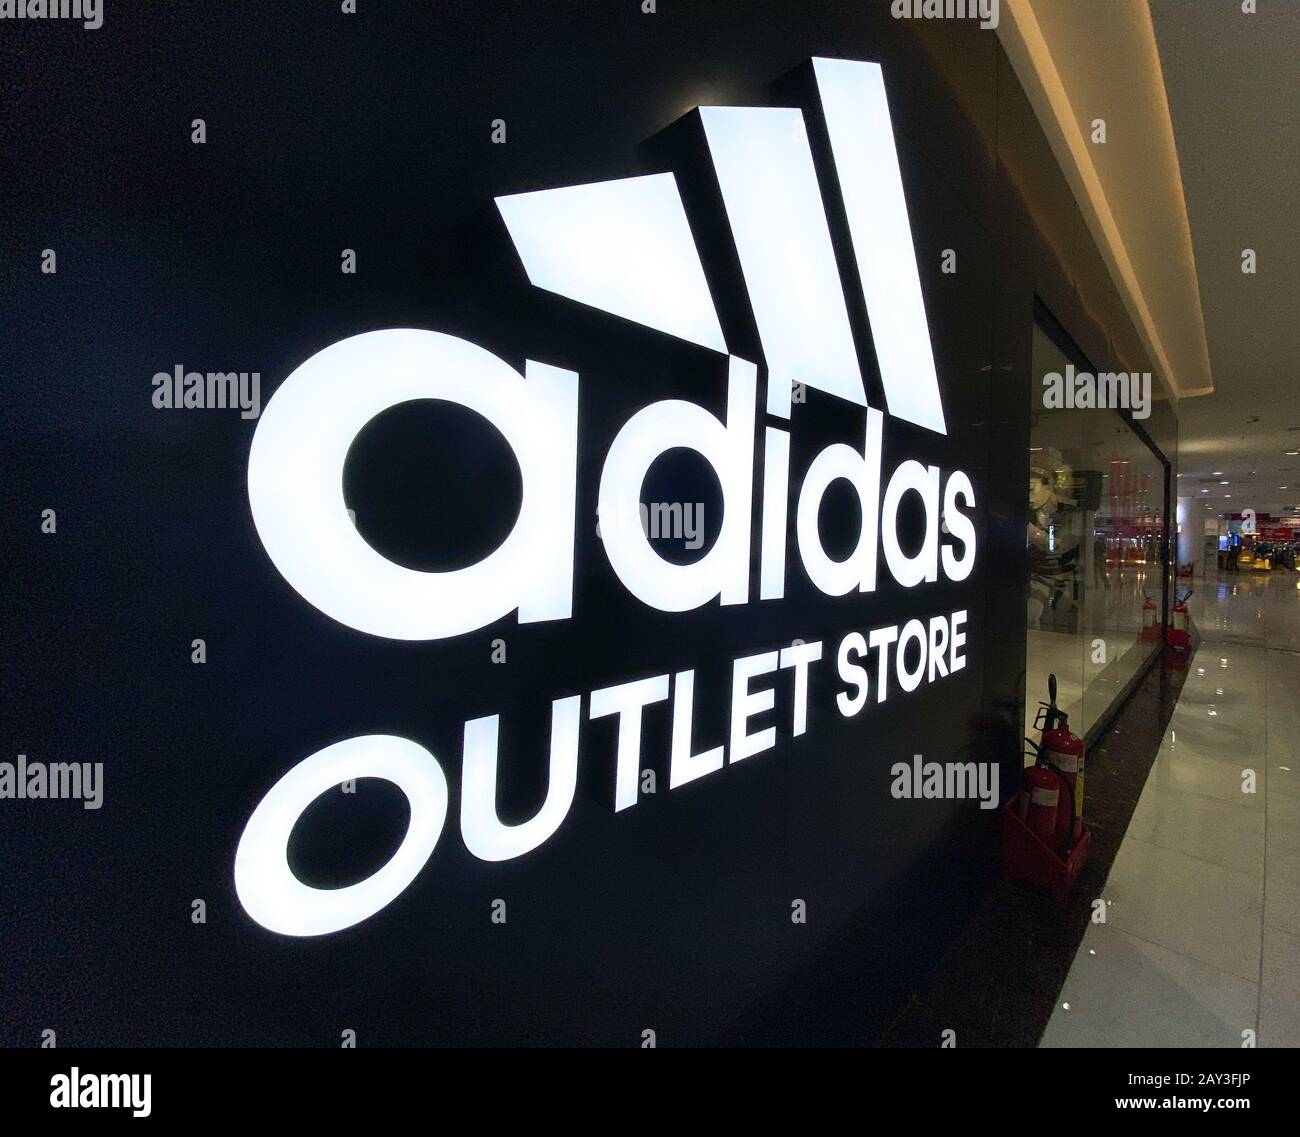 Saigon, Vietnam - Jan 15, 2020. Adidas sign at the entrance to the store in  Gigamall Shopping Center in Saigon (Ho Chi Minh City), Vietnam Stock Photo  - Alamy